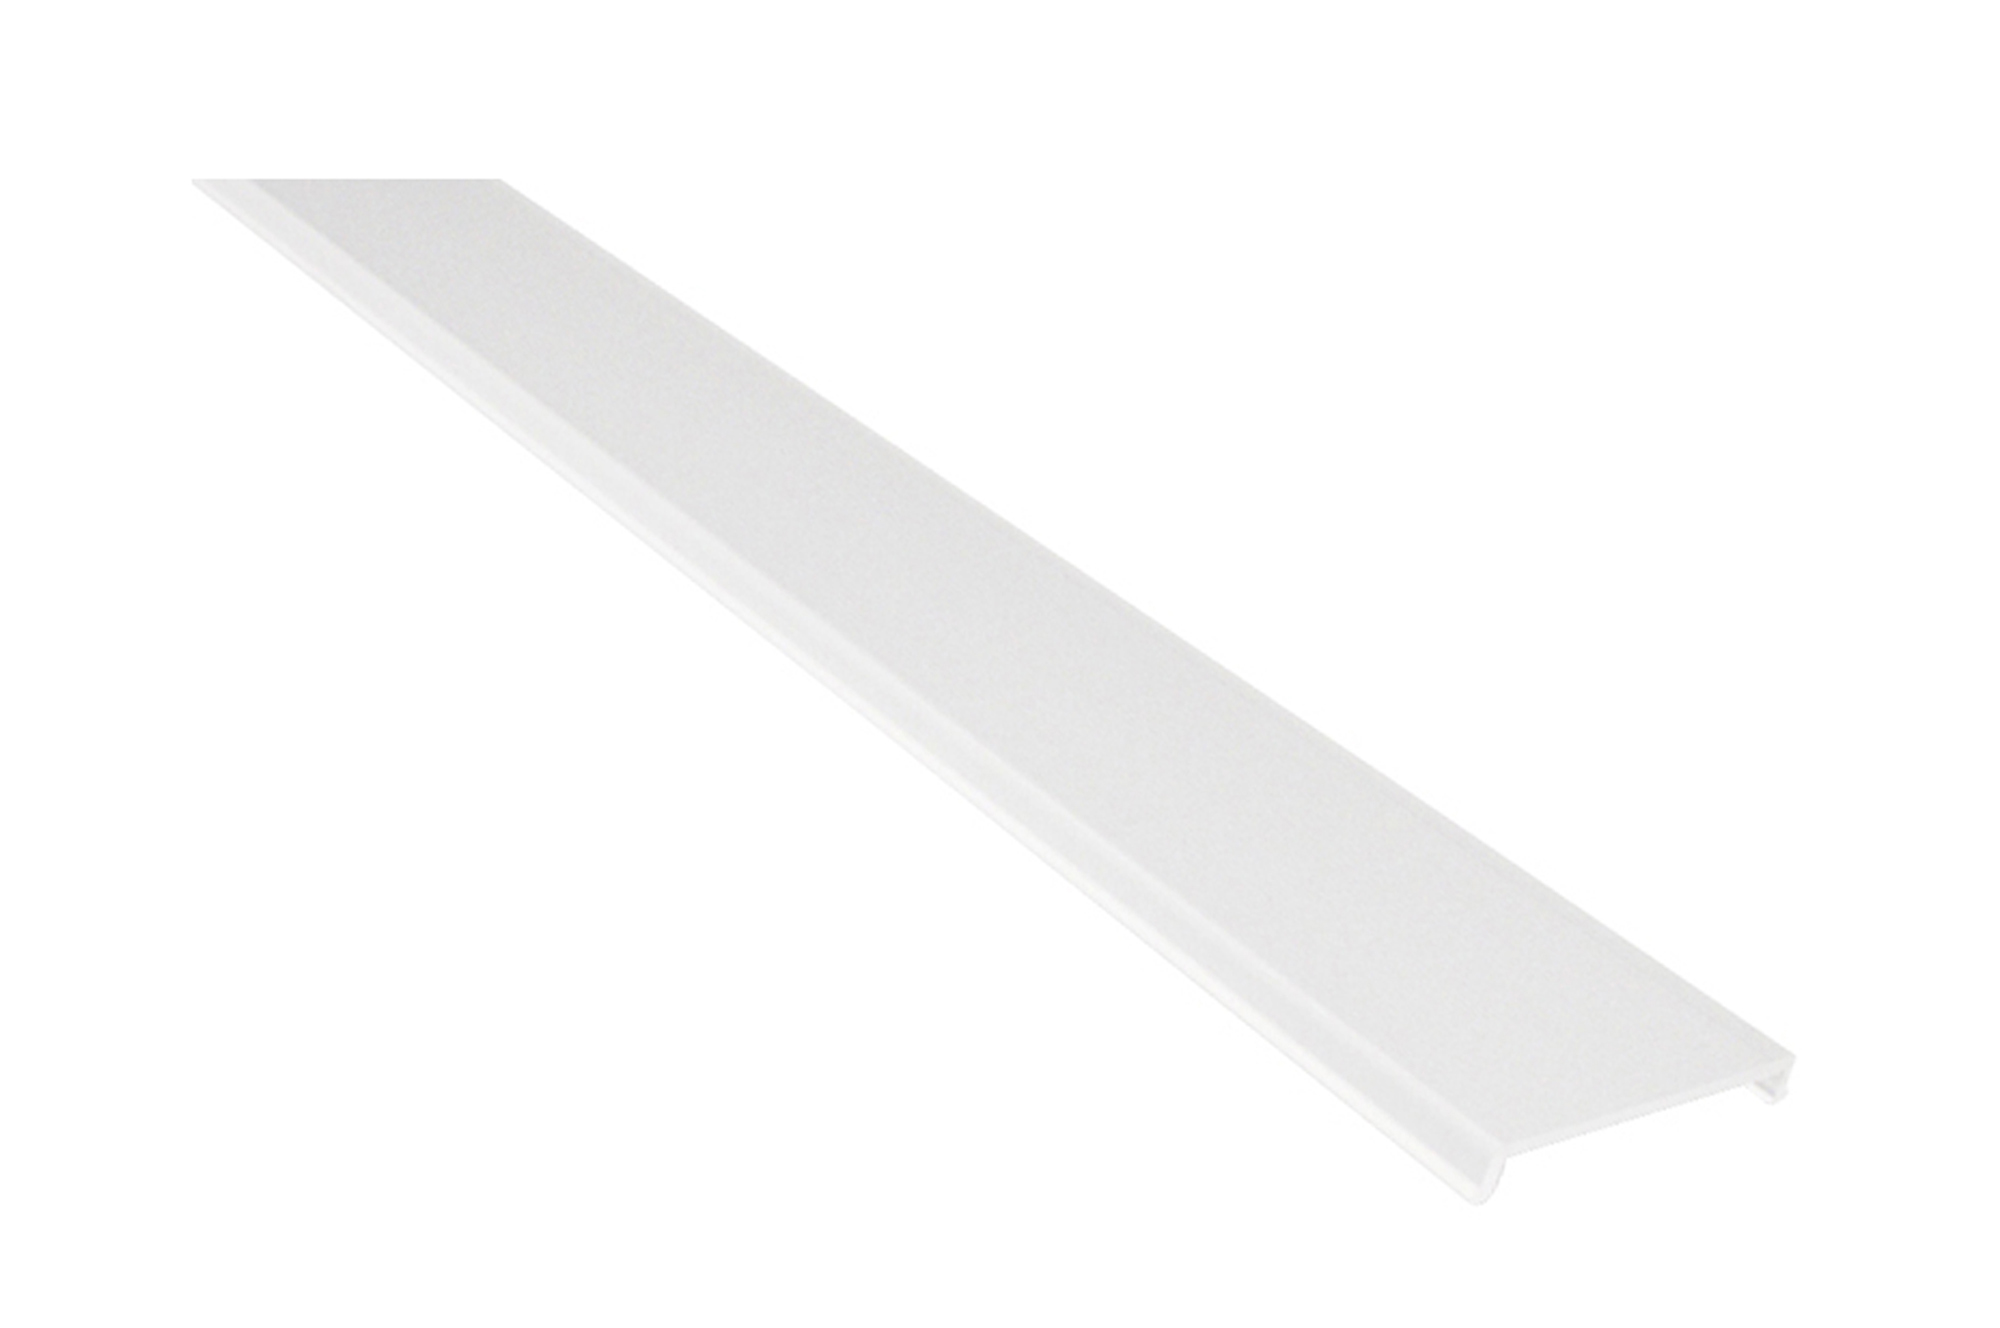 DA910046  Lin 4335W; 2m Flat Frosted Diffuser Cover For DA900034; 33mm Wide; 85% Transmittance